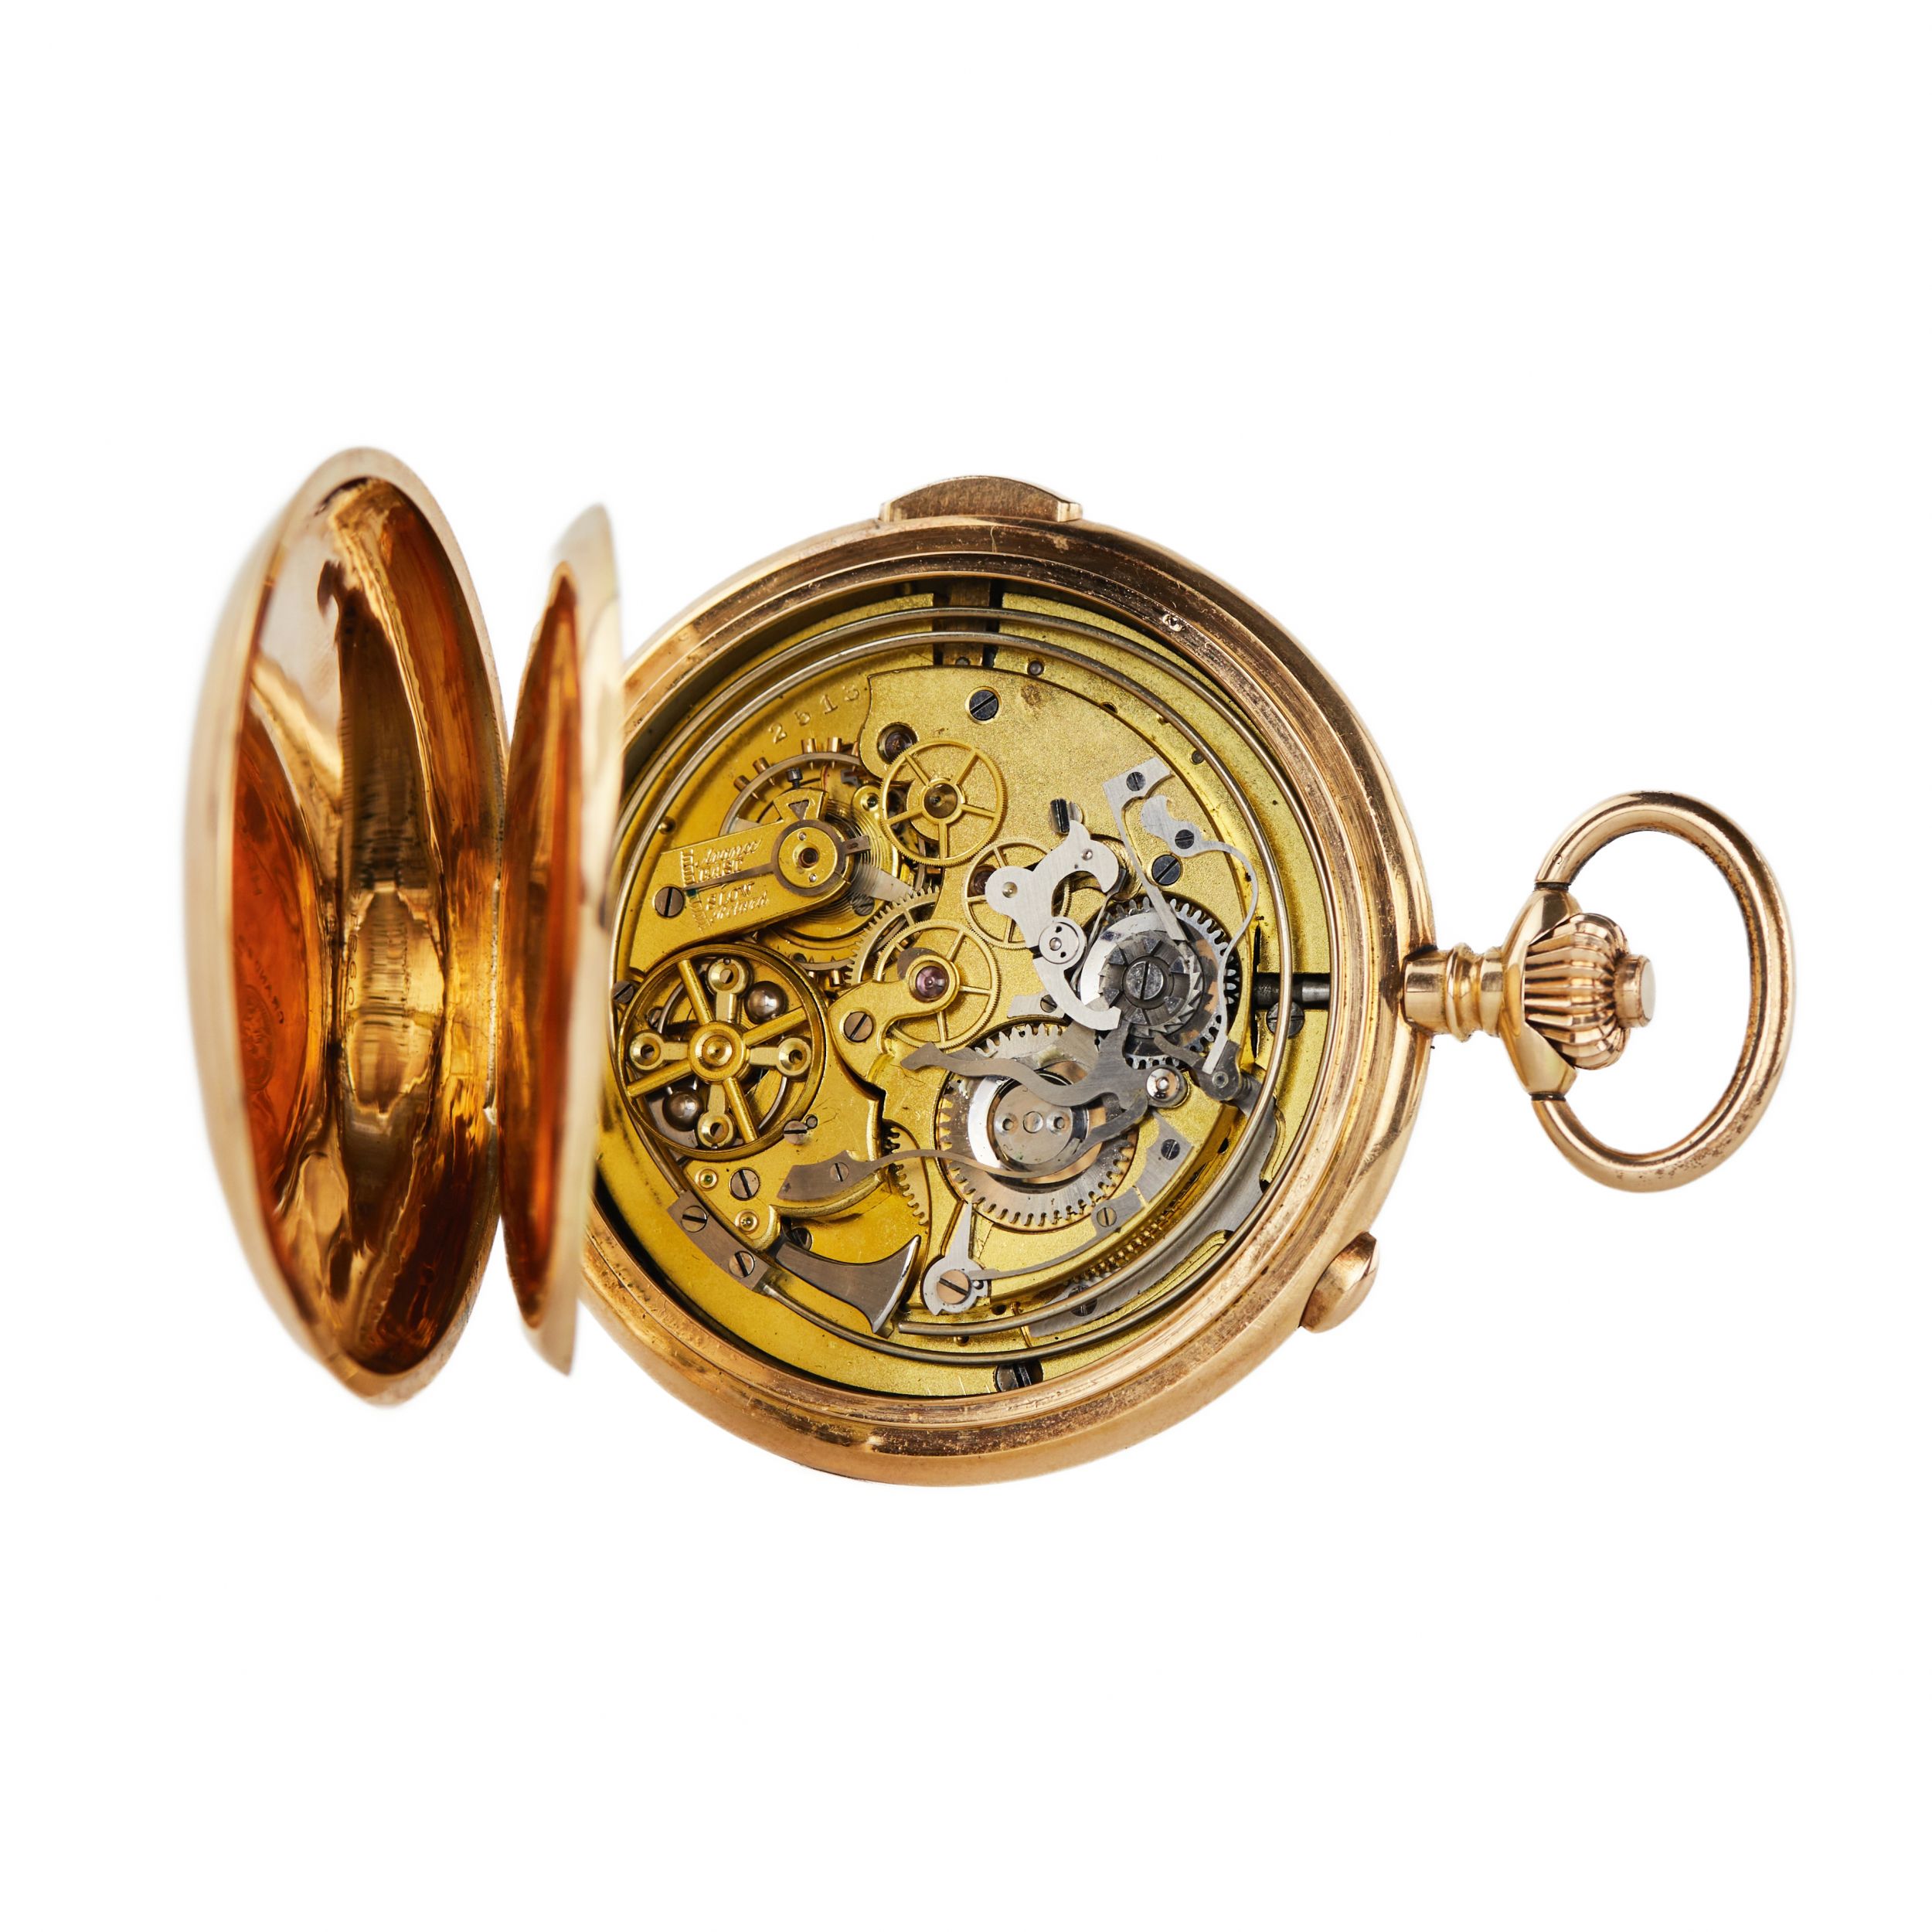 Heures Repetition Quarts Taschenuhr Chronographe 14k Gold Pocket Watch - Image 5 of 11